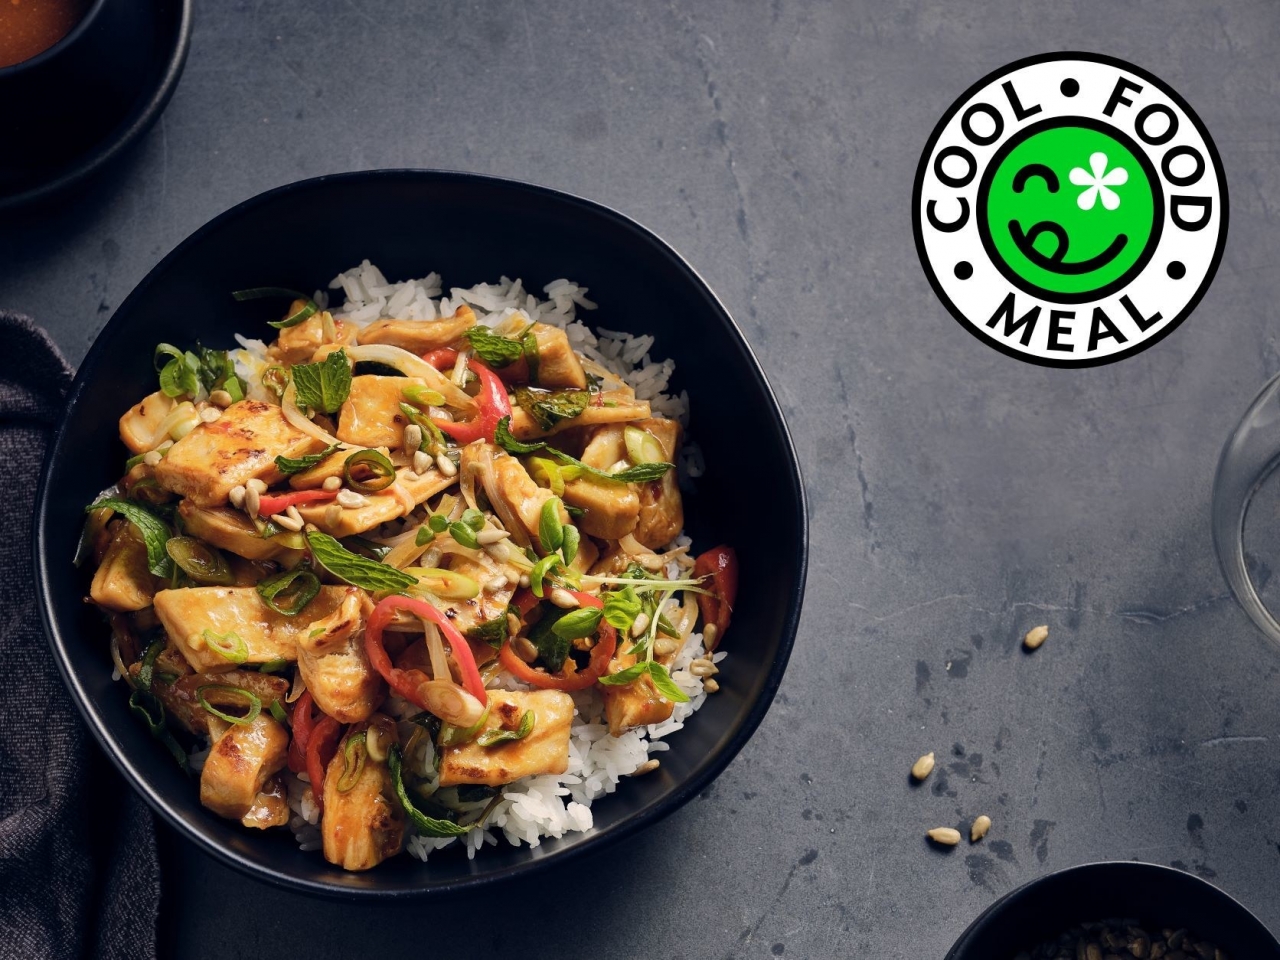 Nestlé Professional Cool Food Meal-certified stir fry featuring Sweet Earth plant-based Mindful Chik'n.